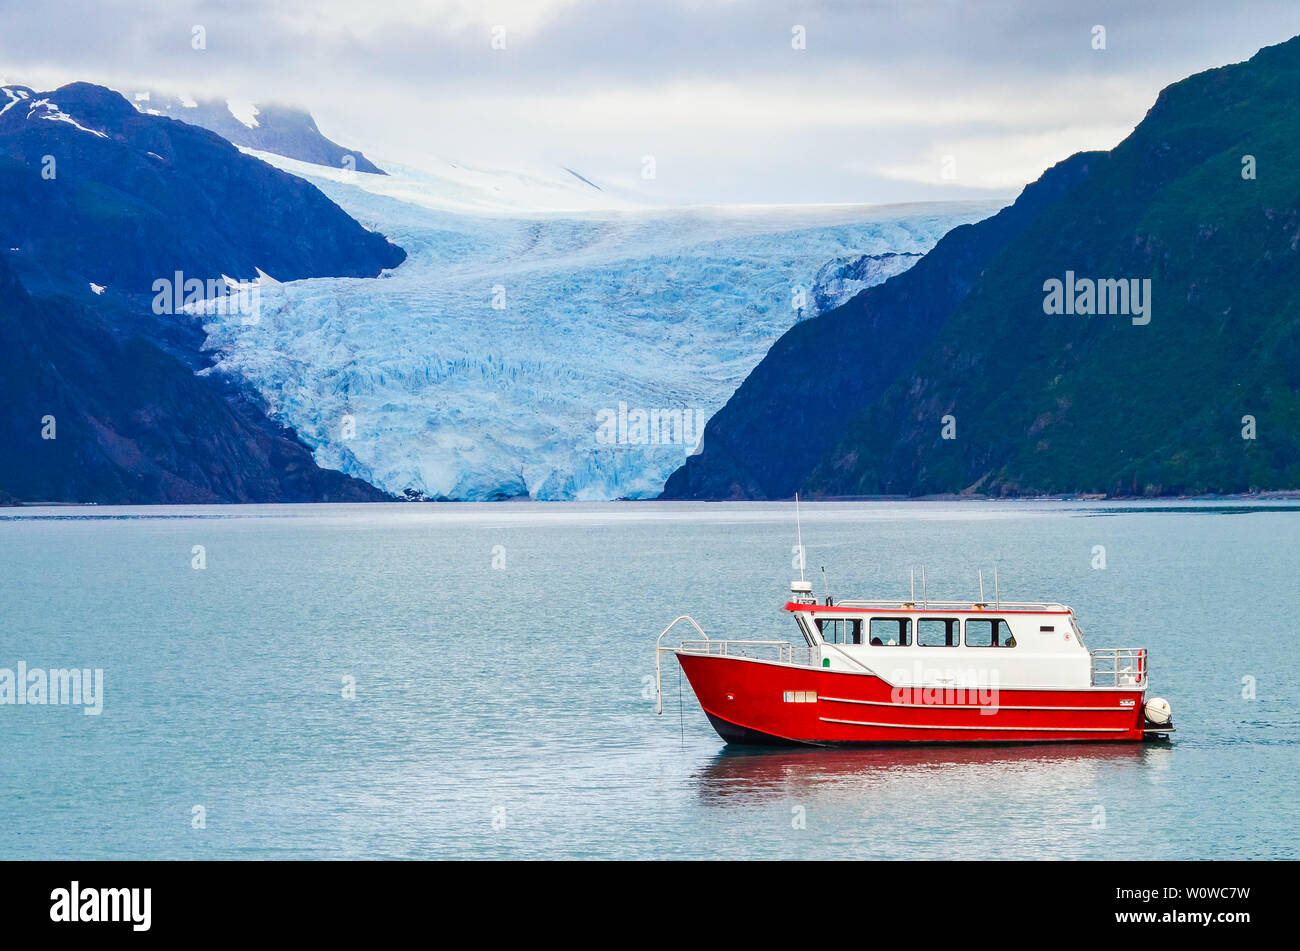 Distant view of a Holgate glacier with red boat in the foreground in Kenai fjords National Park, Seward, Alaska, United States, North America. Stock Photo